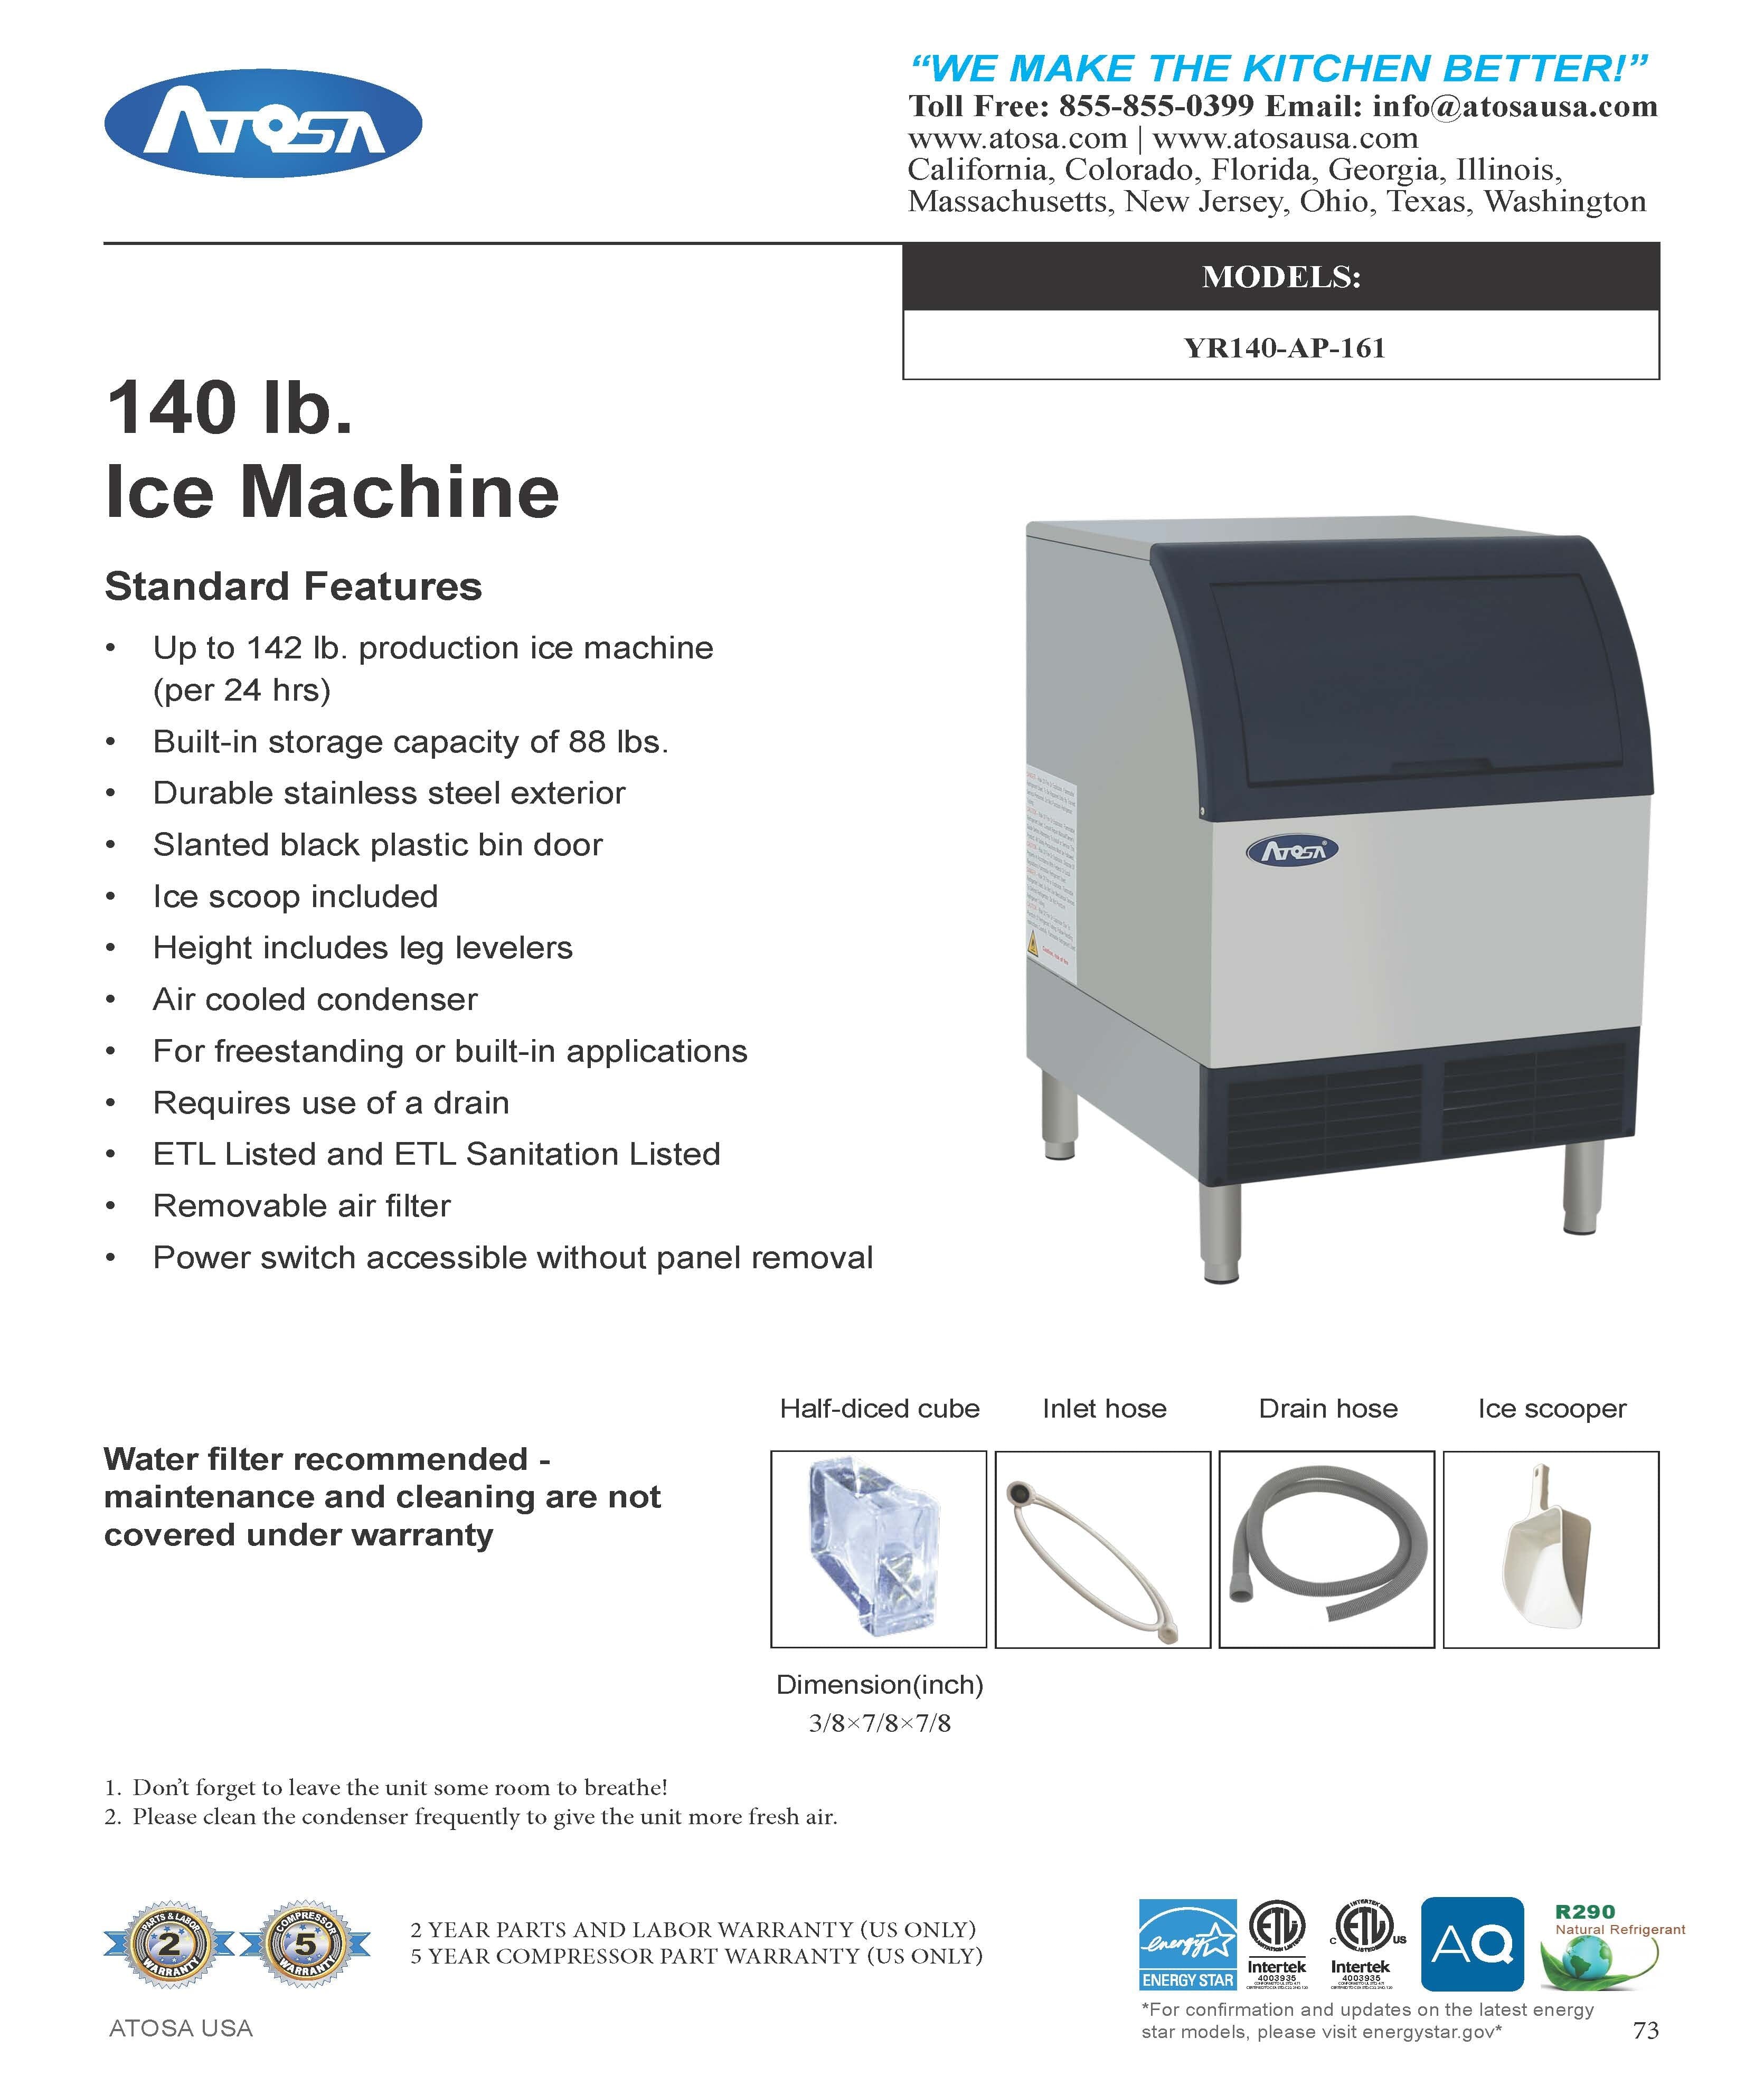 Atosa YR140-AP-161 Undercounter Cube-Style Self-Contained Ice Maker, 142lb/24hr With Built-In 88lb Storage Bin Ice Machine Atosa 